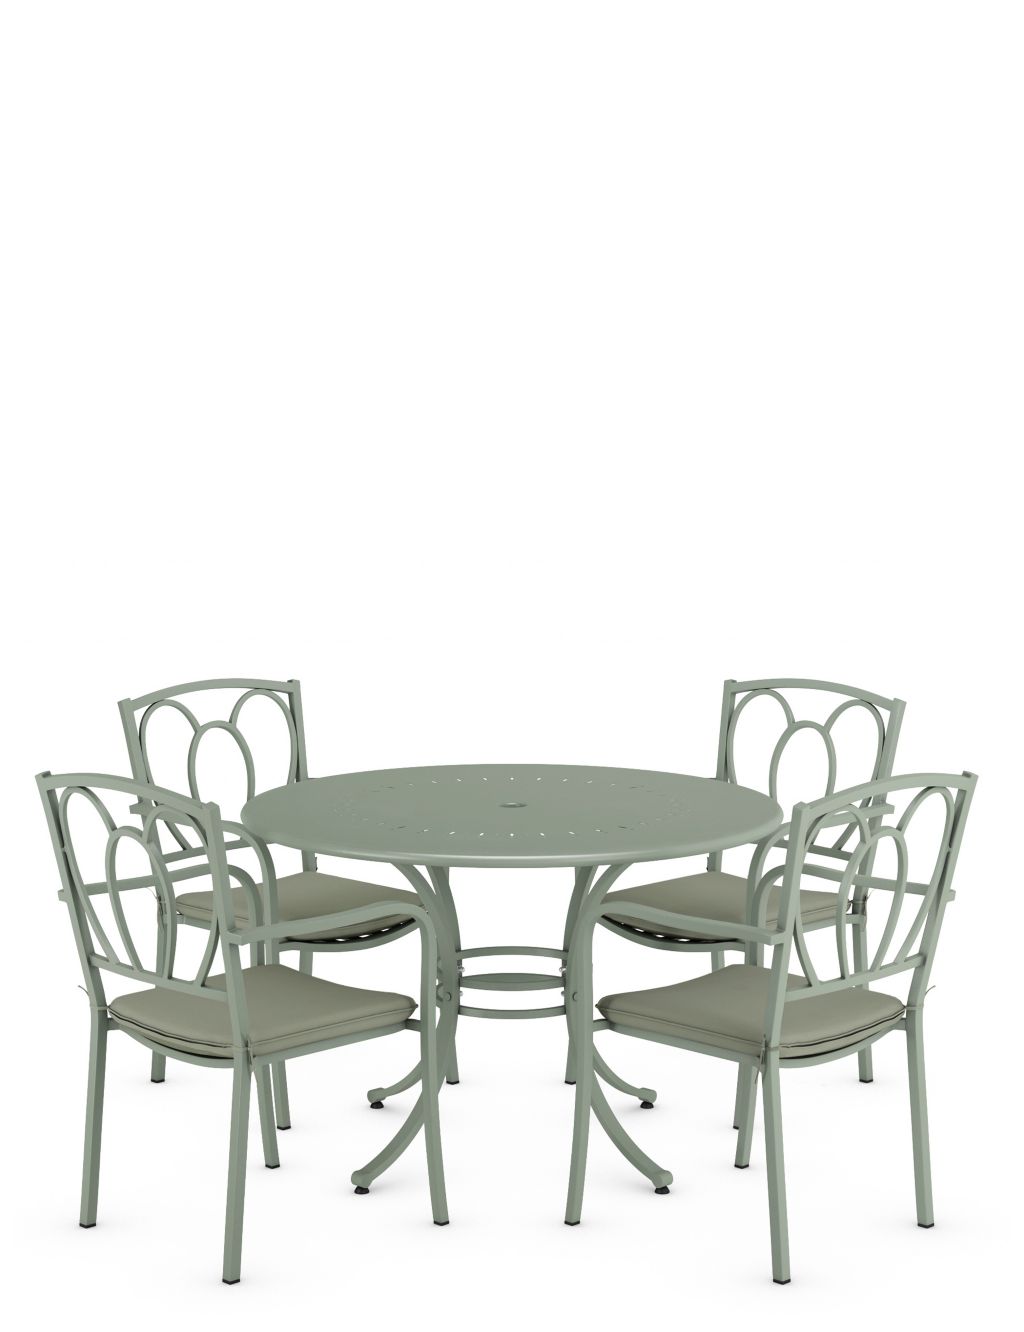 Stroud 4 Seater Garden Table & Chairs